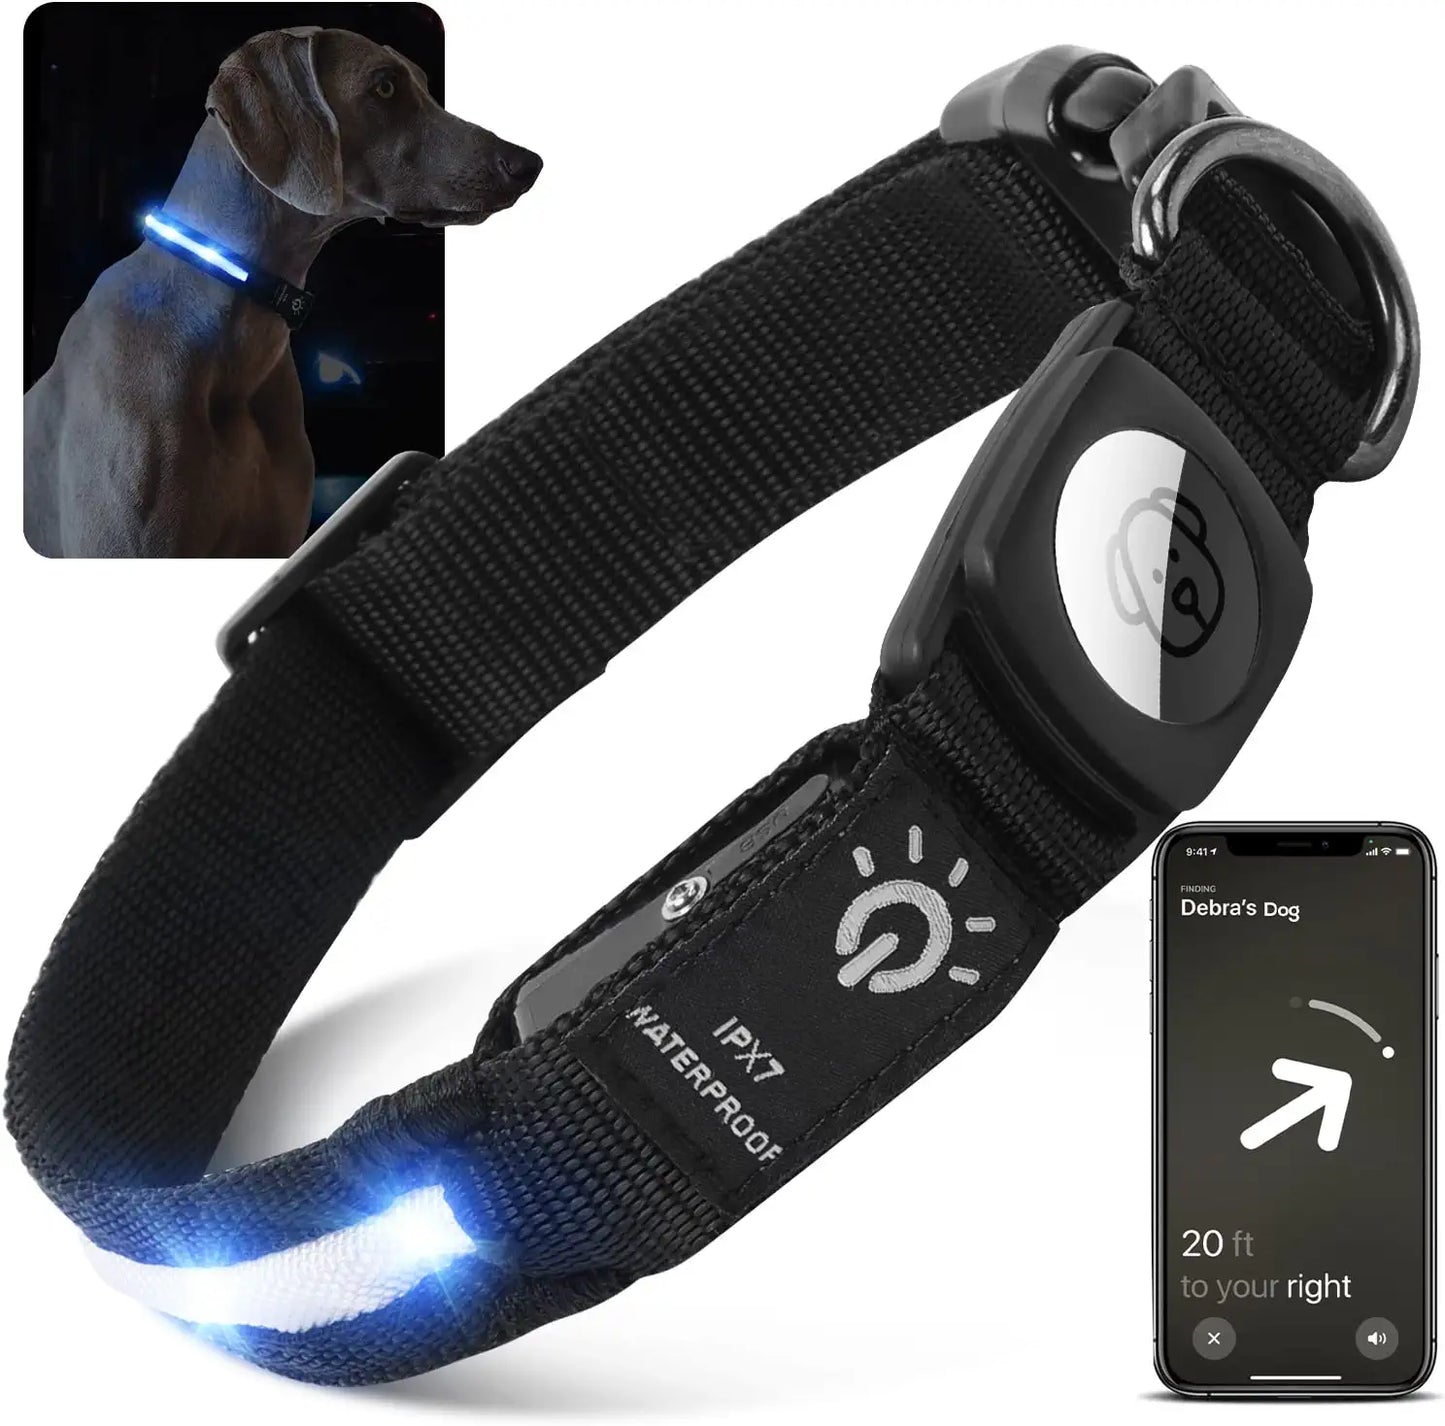 LED Air Tag Dog Collar - Light up Dog Collar[Ipx7 Waterproof] with Apple Air Tag Holder Case, Durable Rechargeable Lighted Air Tag Dog Collar Accessories for Puppy Dogs(S, Black)